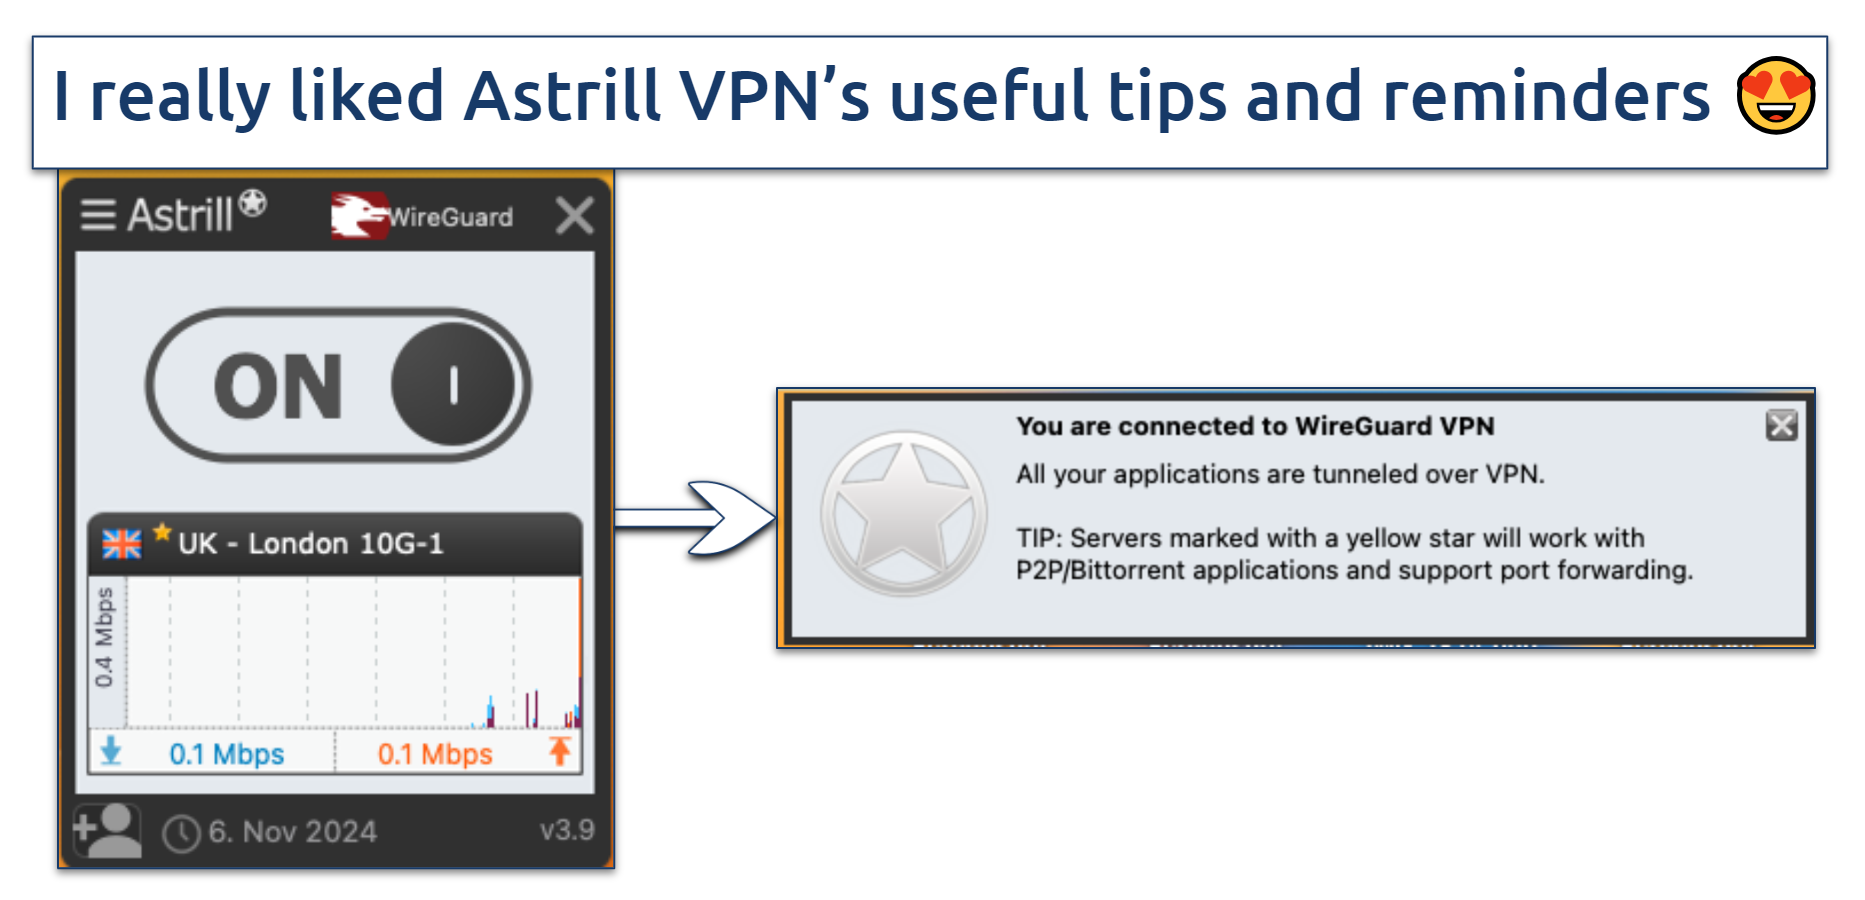 Screenshot of Astrill's useful tips while connected to a server in London